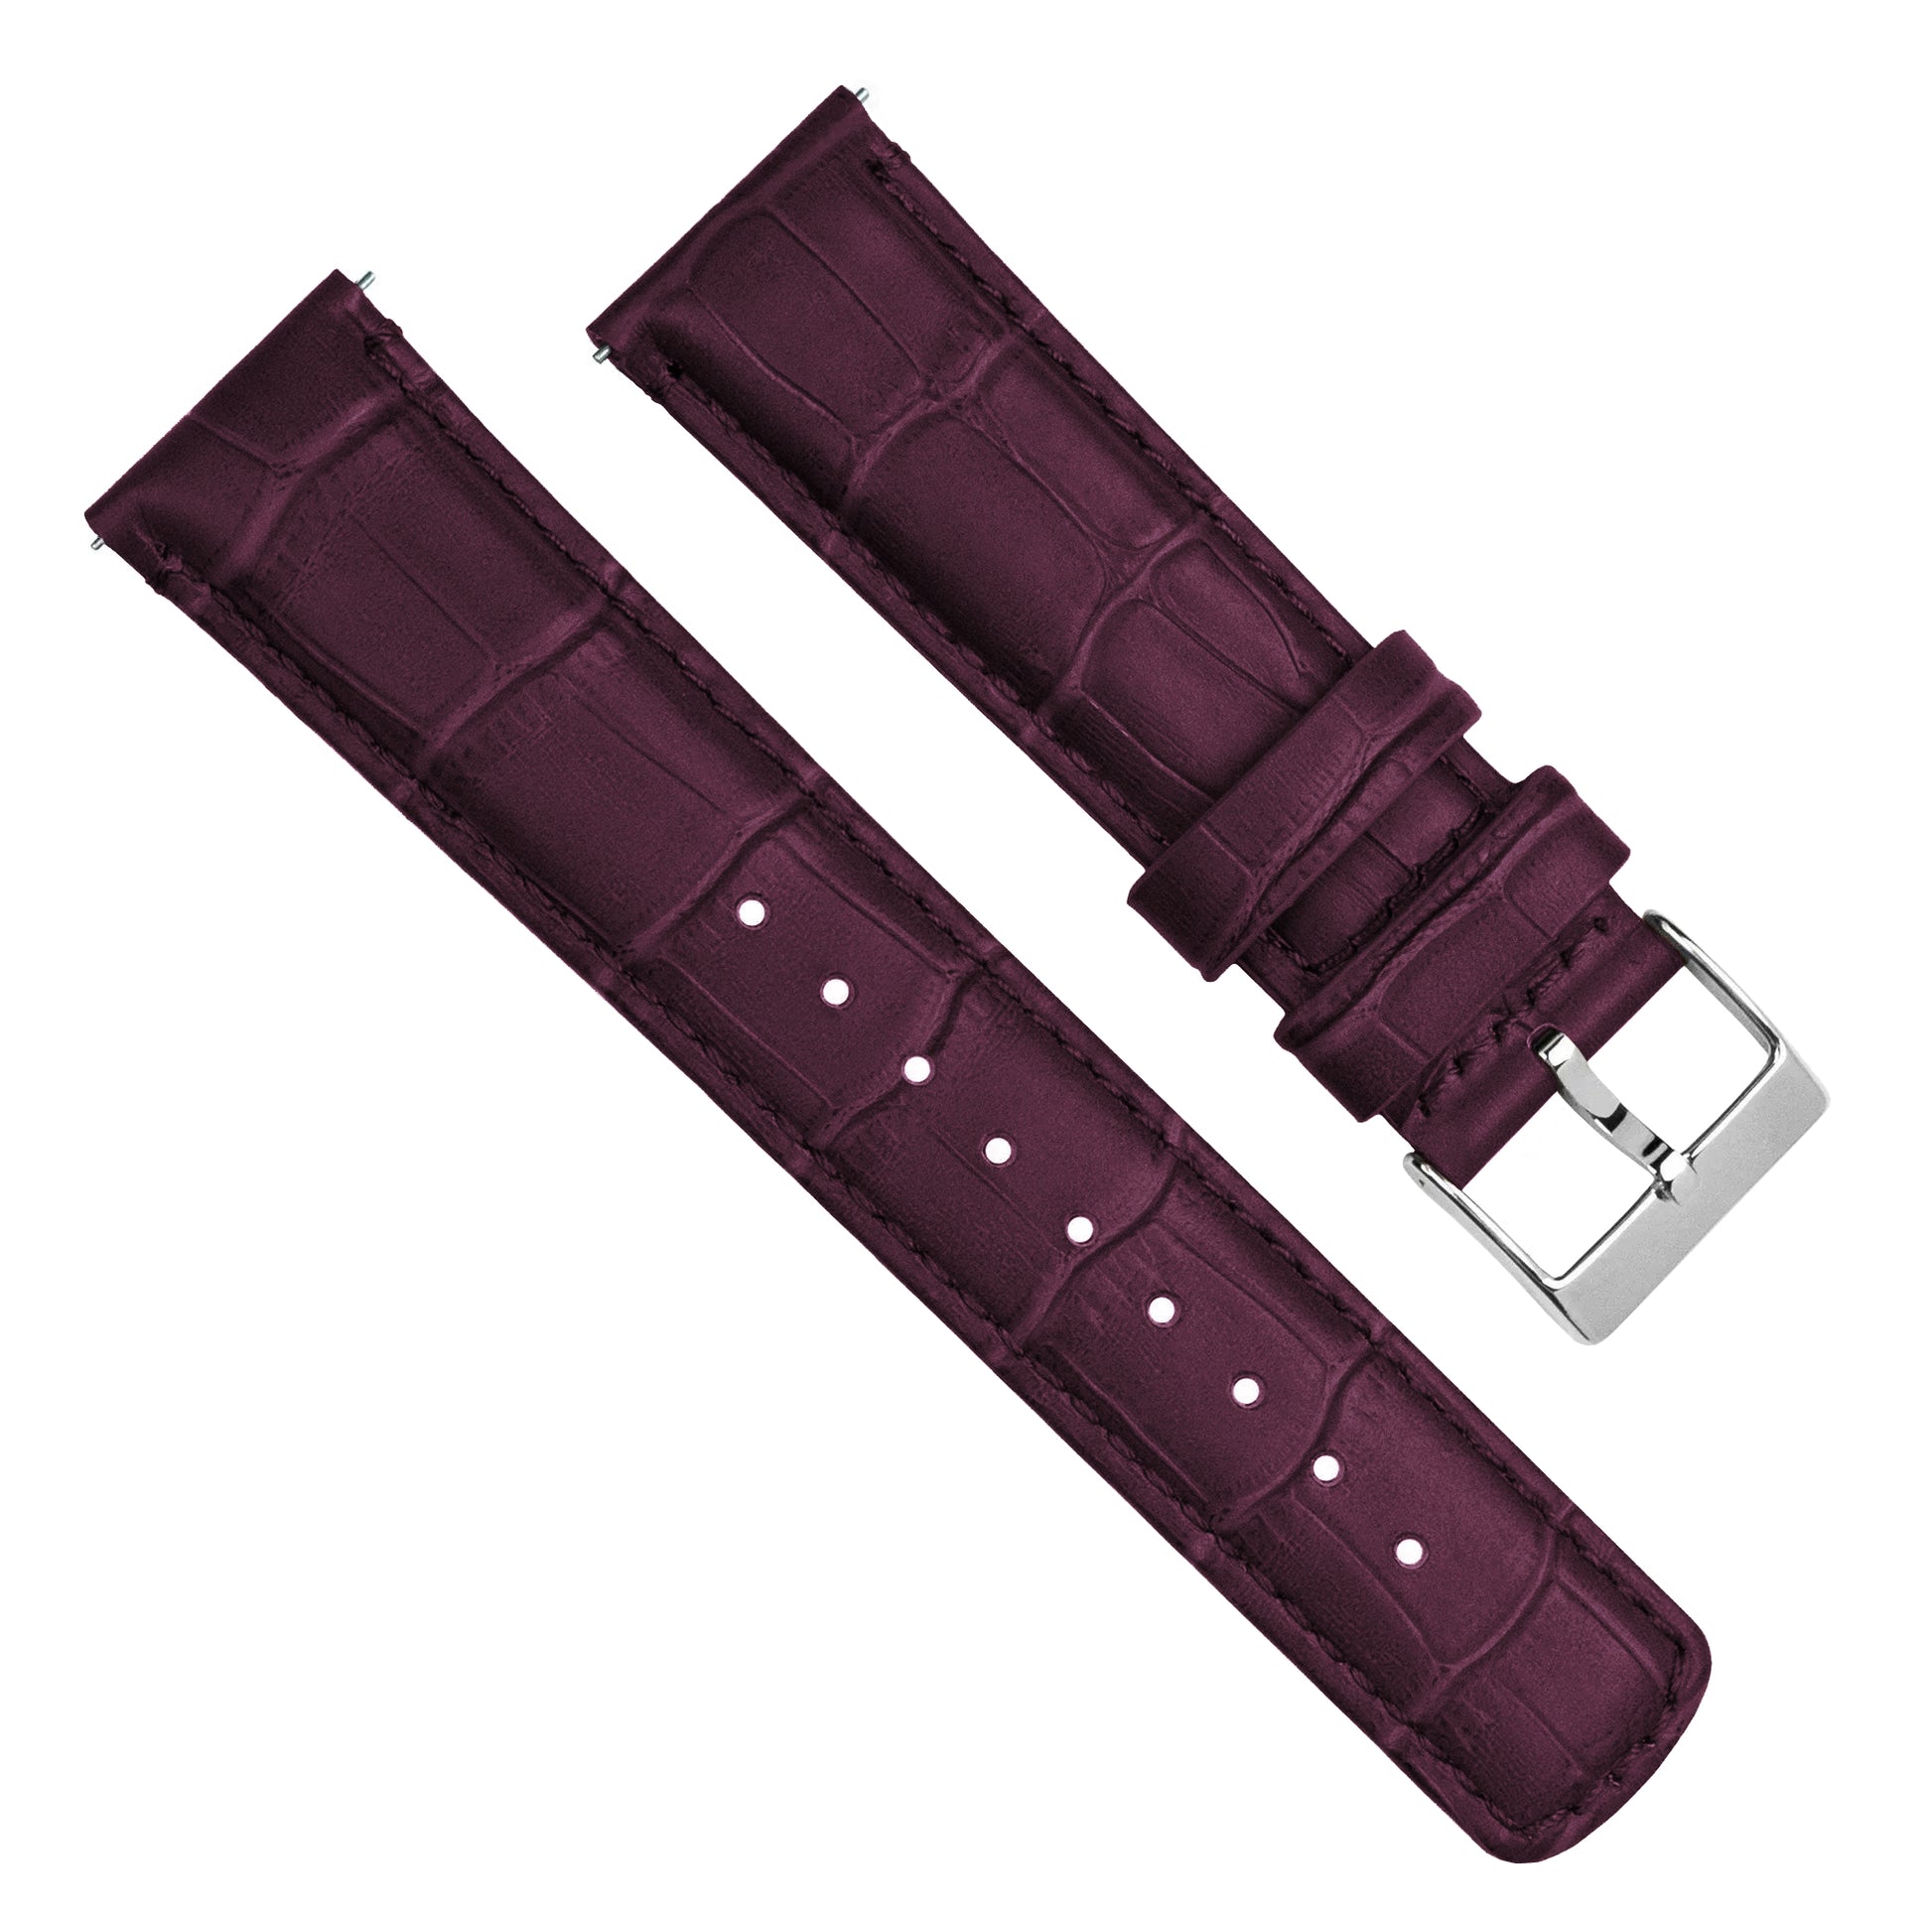 Withings Nokia Activité and Steel HR | Merlot Alligator Grain Leather - Barton Watch Bands